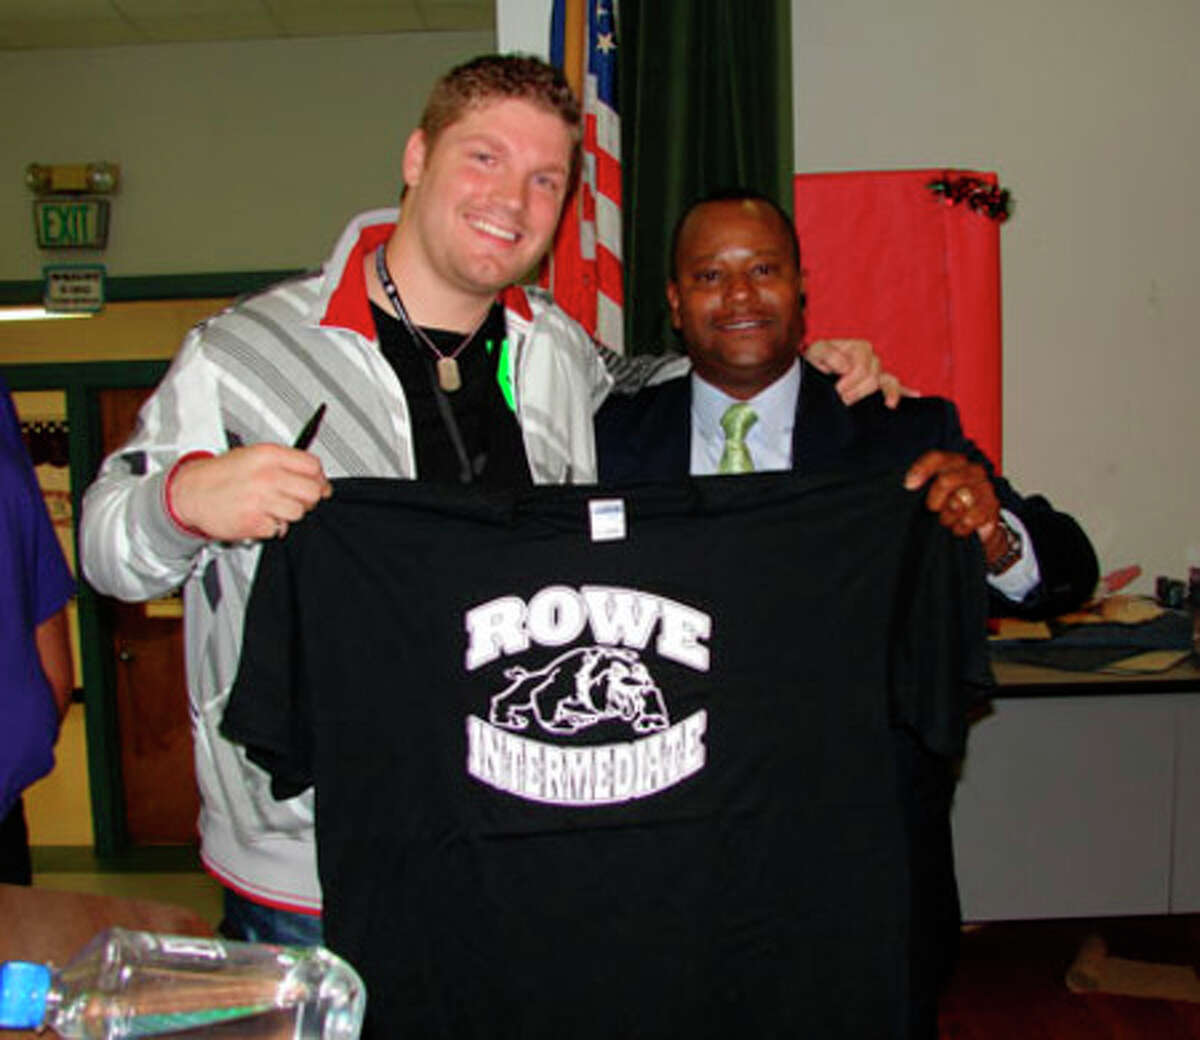 Courtesy photo Michael Sarver visited Rowe Campus Monday, April 27 to inspire the students to do well on the TAKS test. Pictured above, Sarver receives a Rowe T-shirt from Rowe Principal Victor Williams.